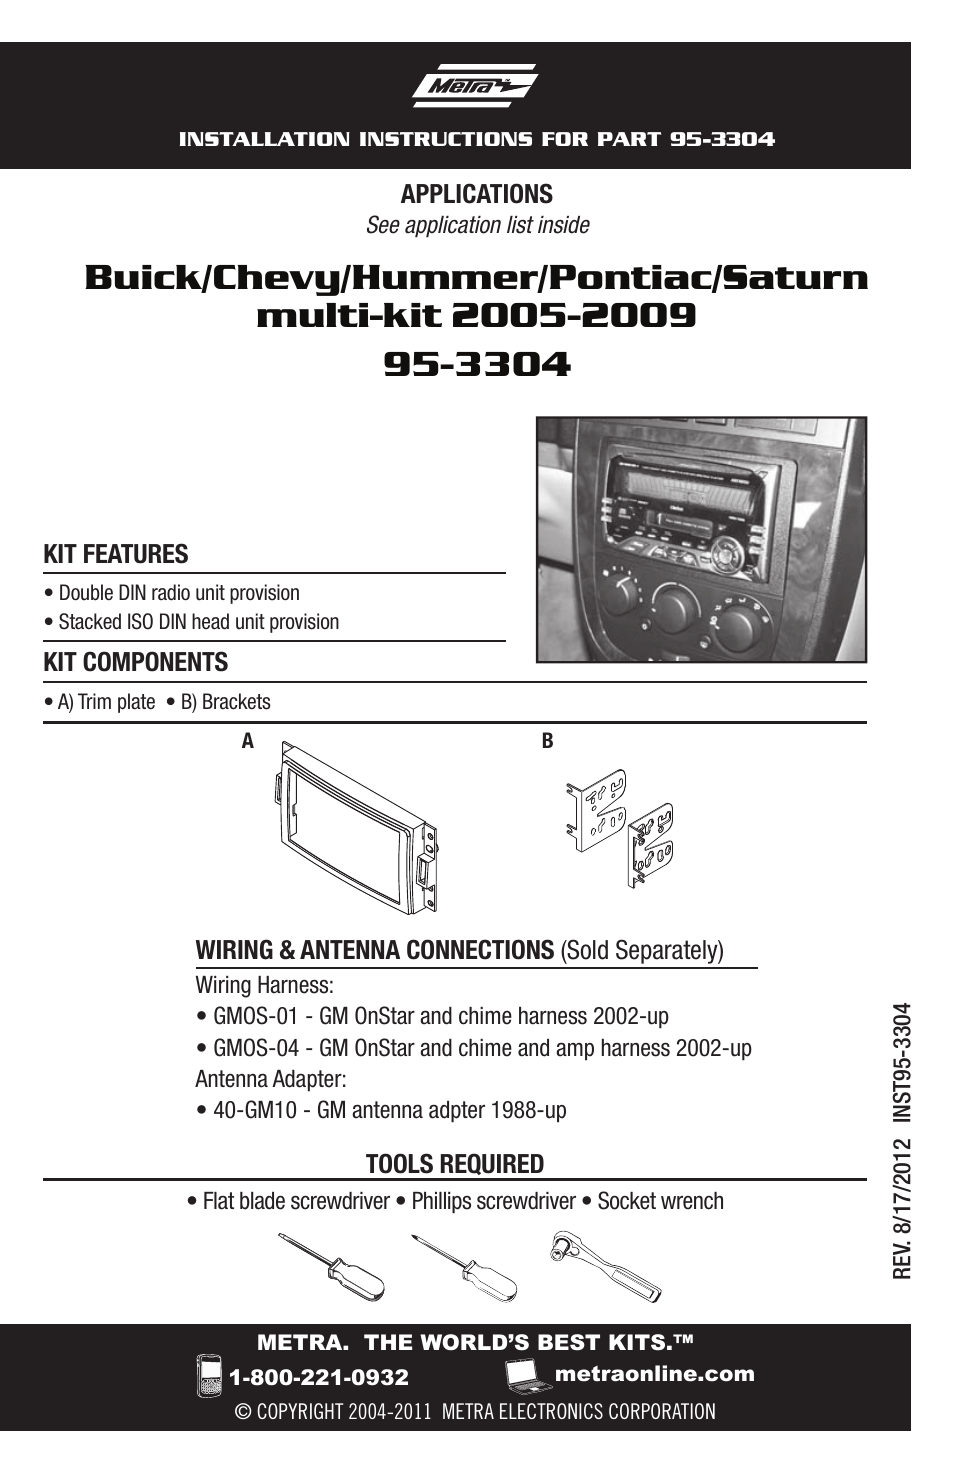 2004 Nissan Altima Stereo Wiring - Wiring Diagram